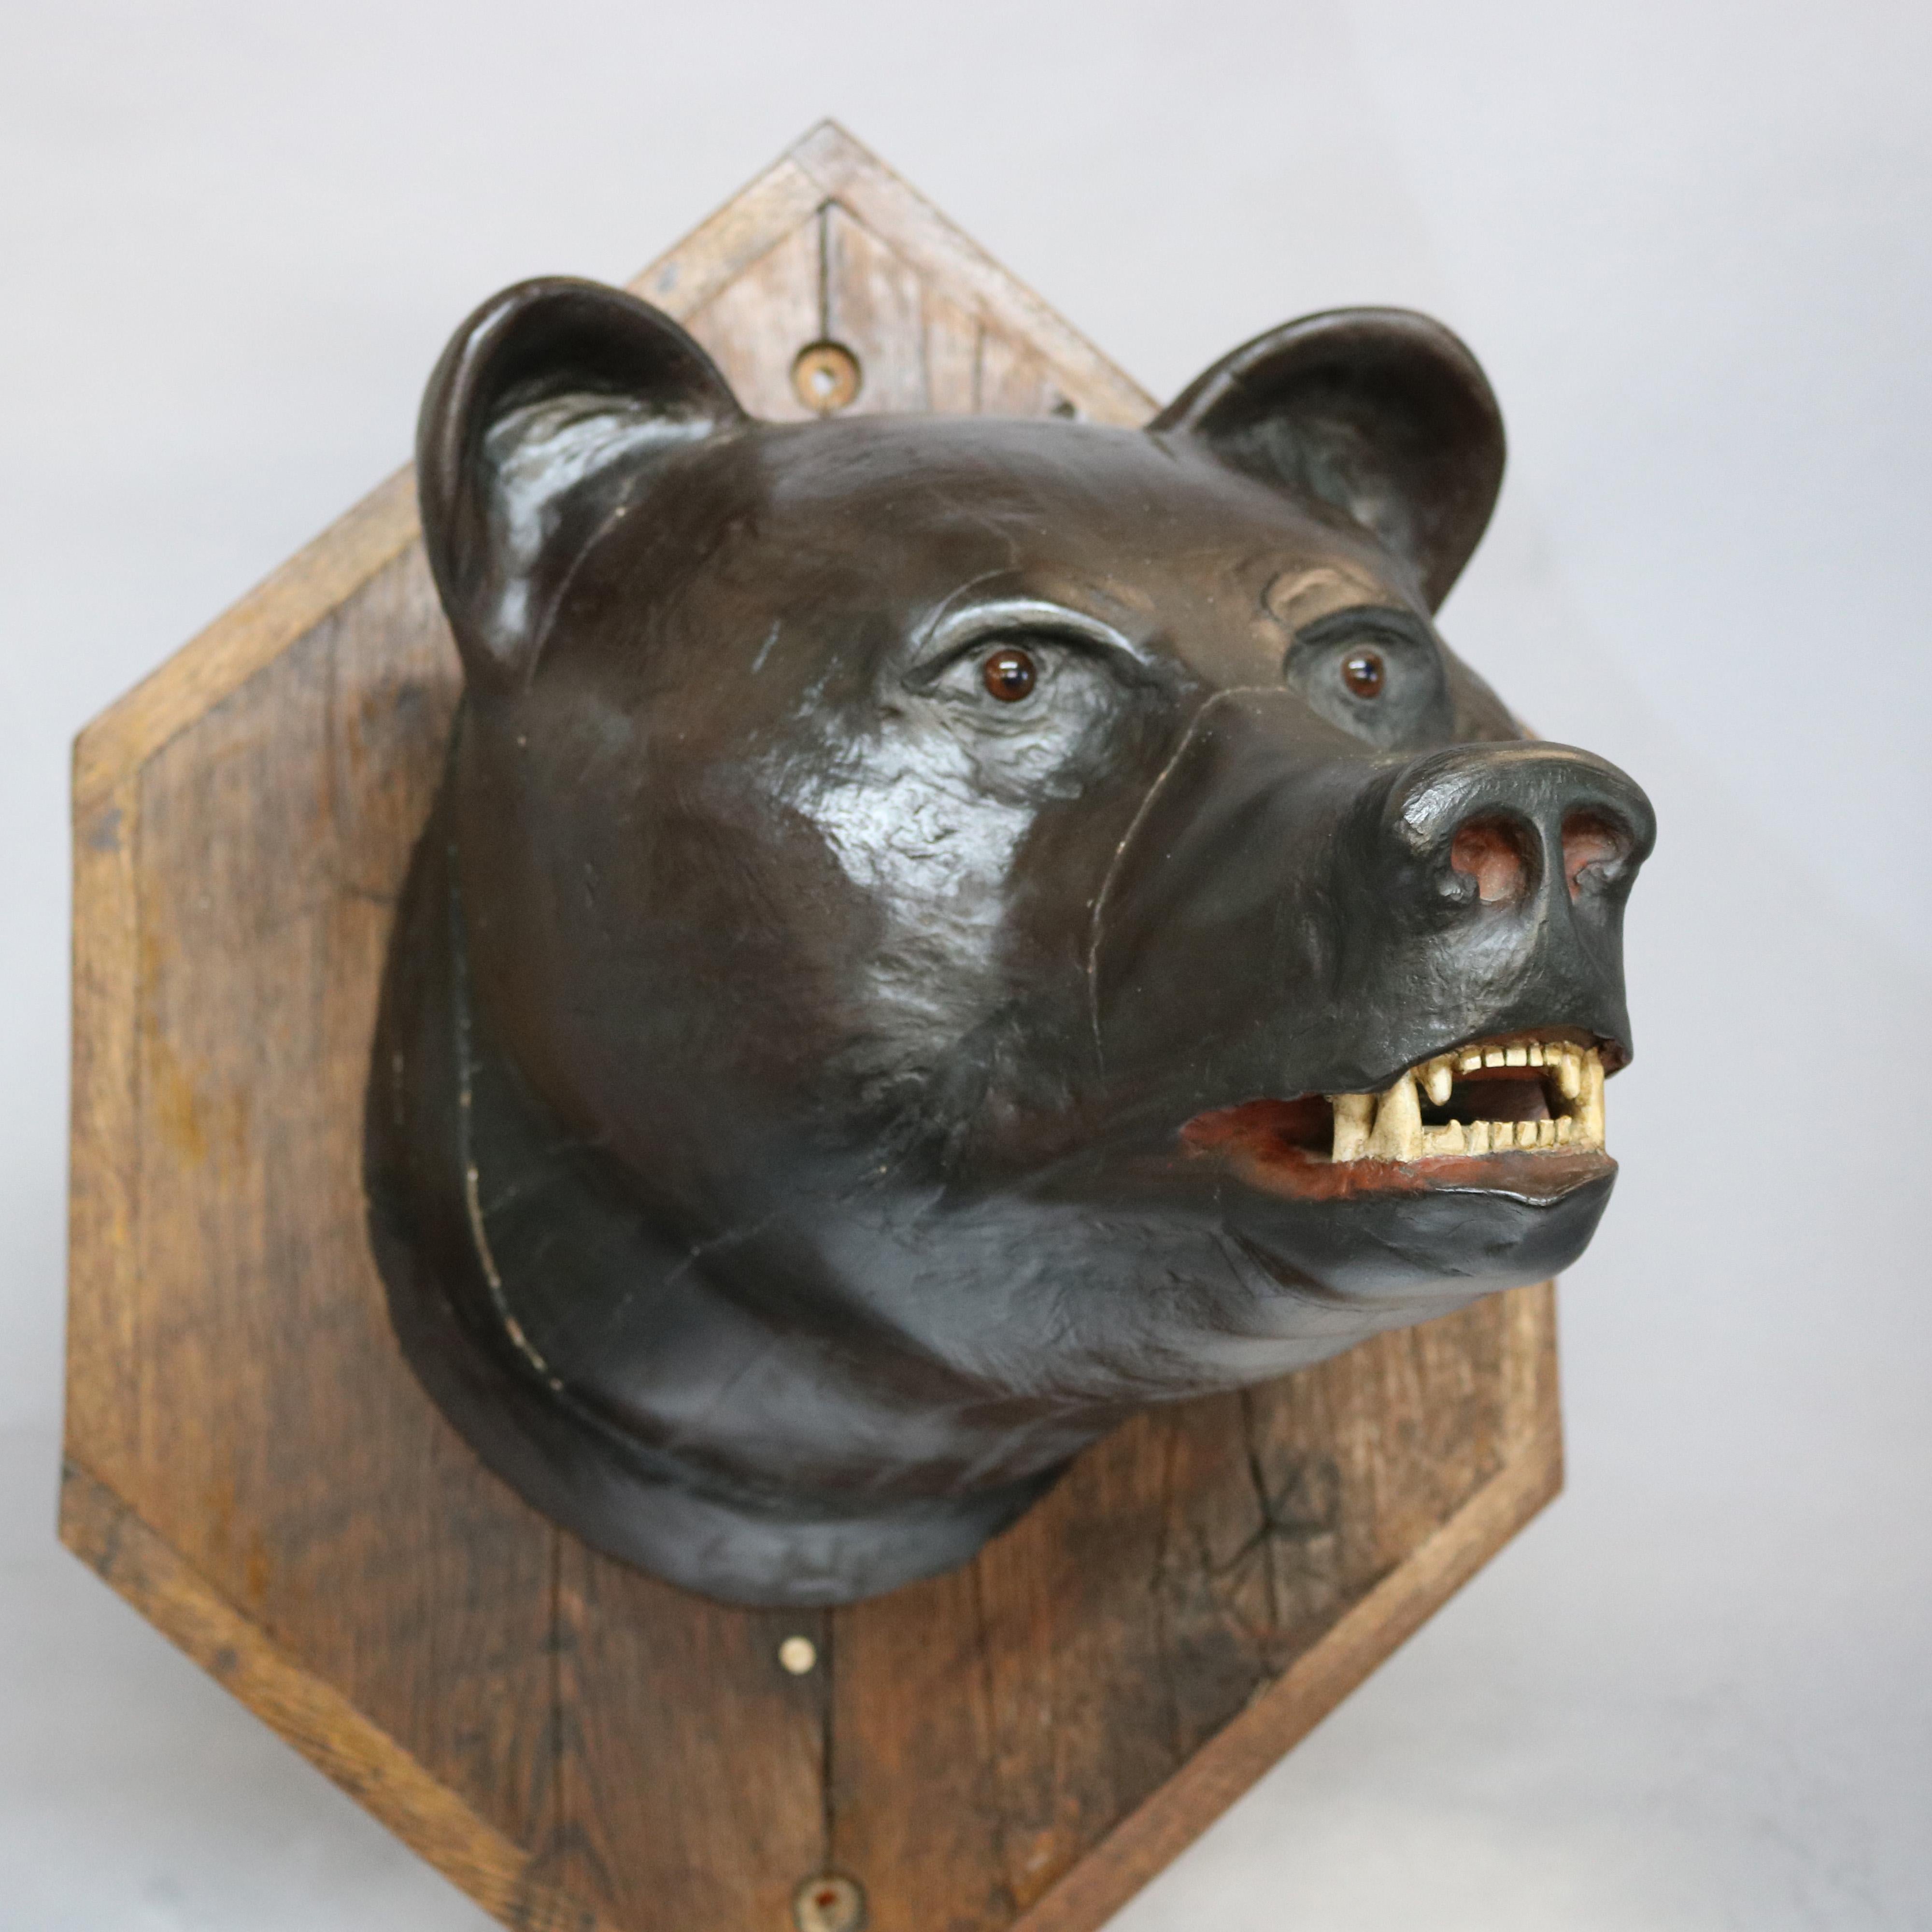 North American Antique Figural Carved Wood & Composition Polychromed Bear Mount on Plaque c1900